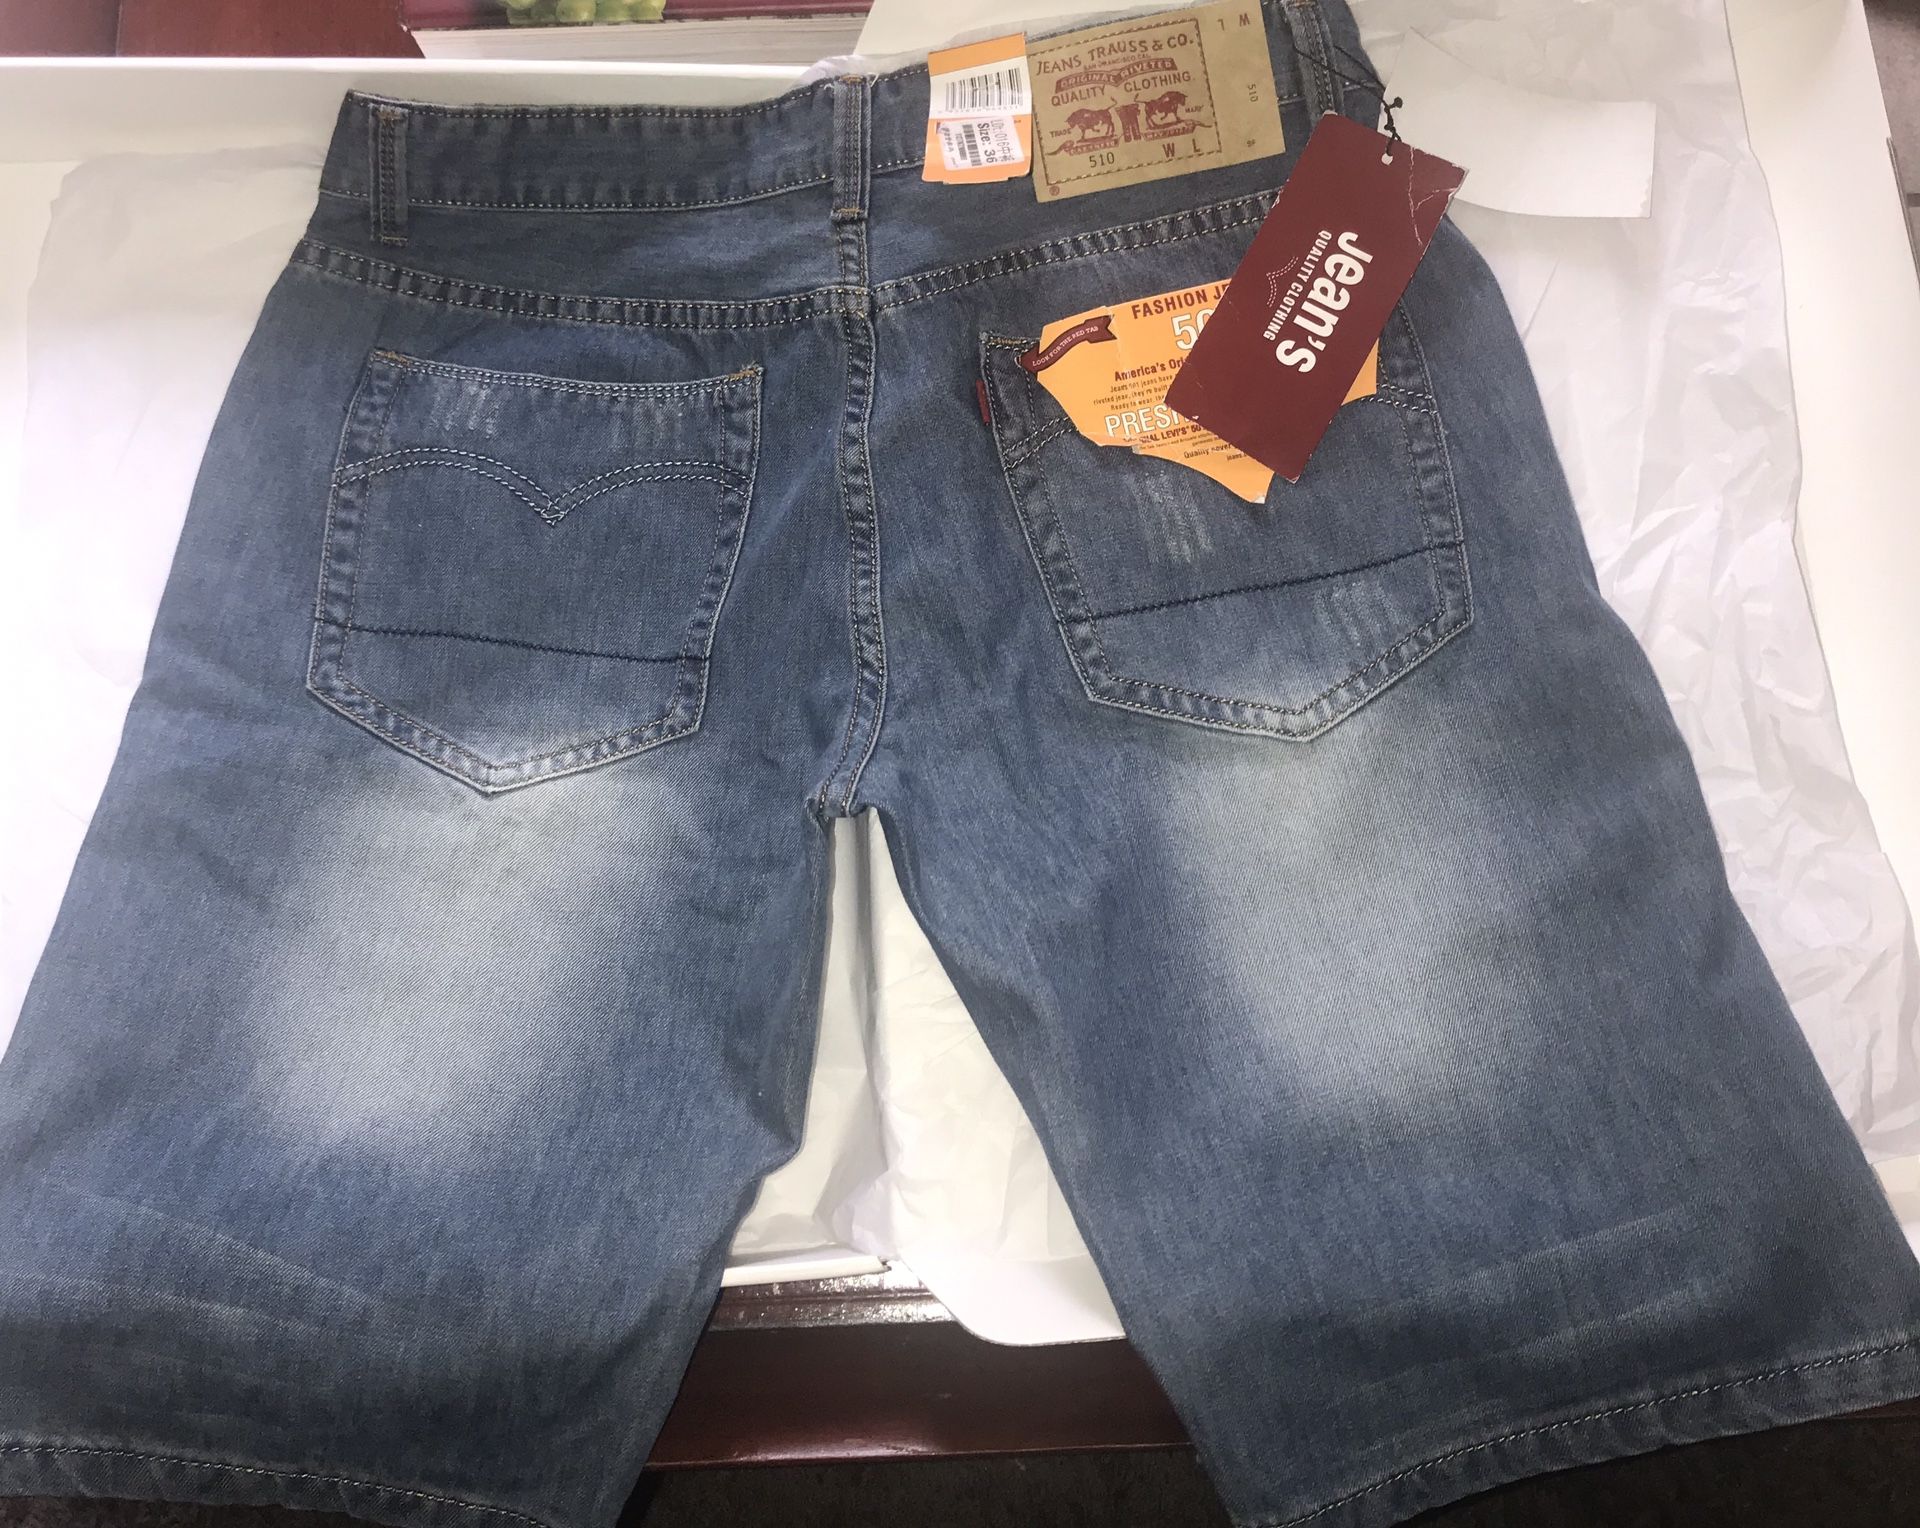 Levi’s Slim Fitted Jeans Shorts Waist Size 36